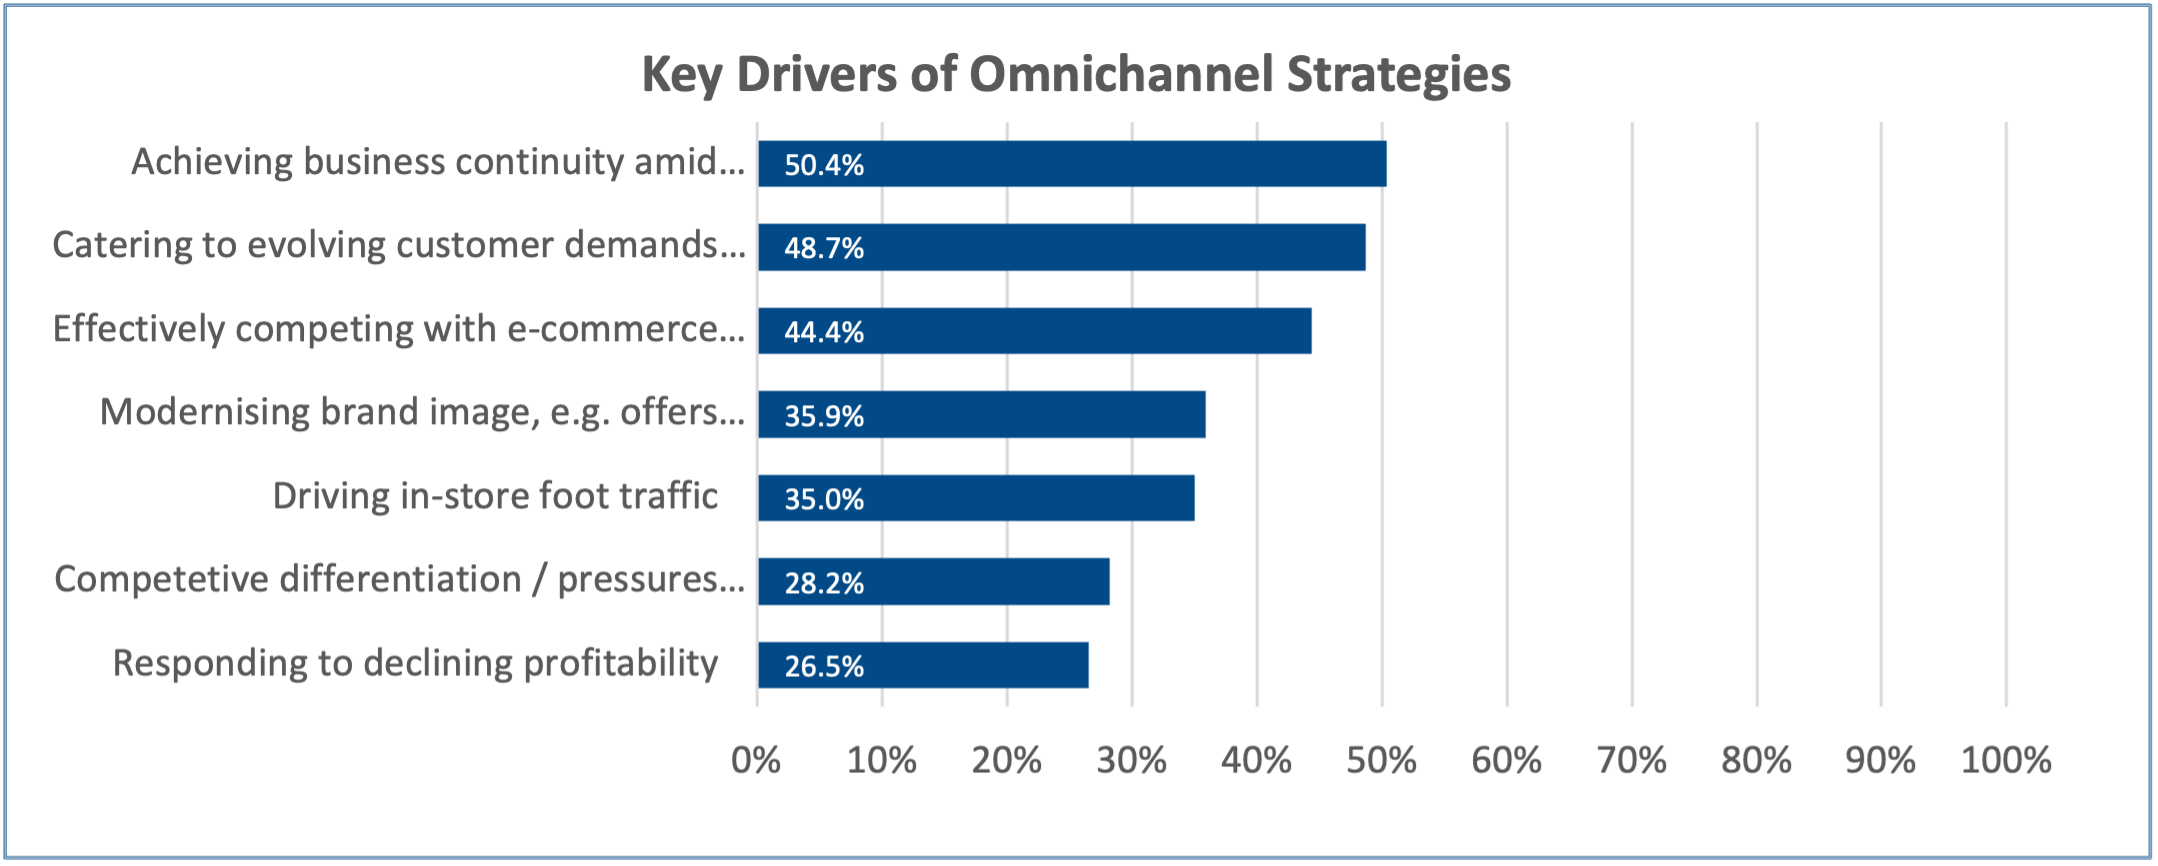 A graph showing the key drivers of omnichannel strategies